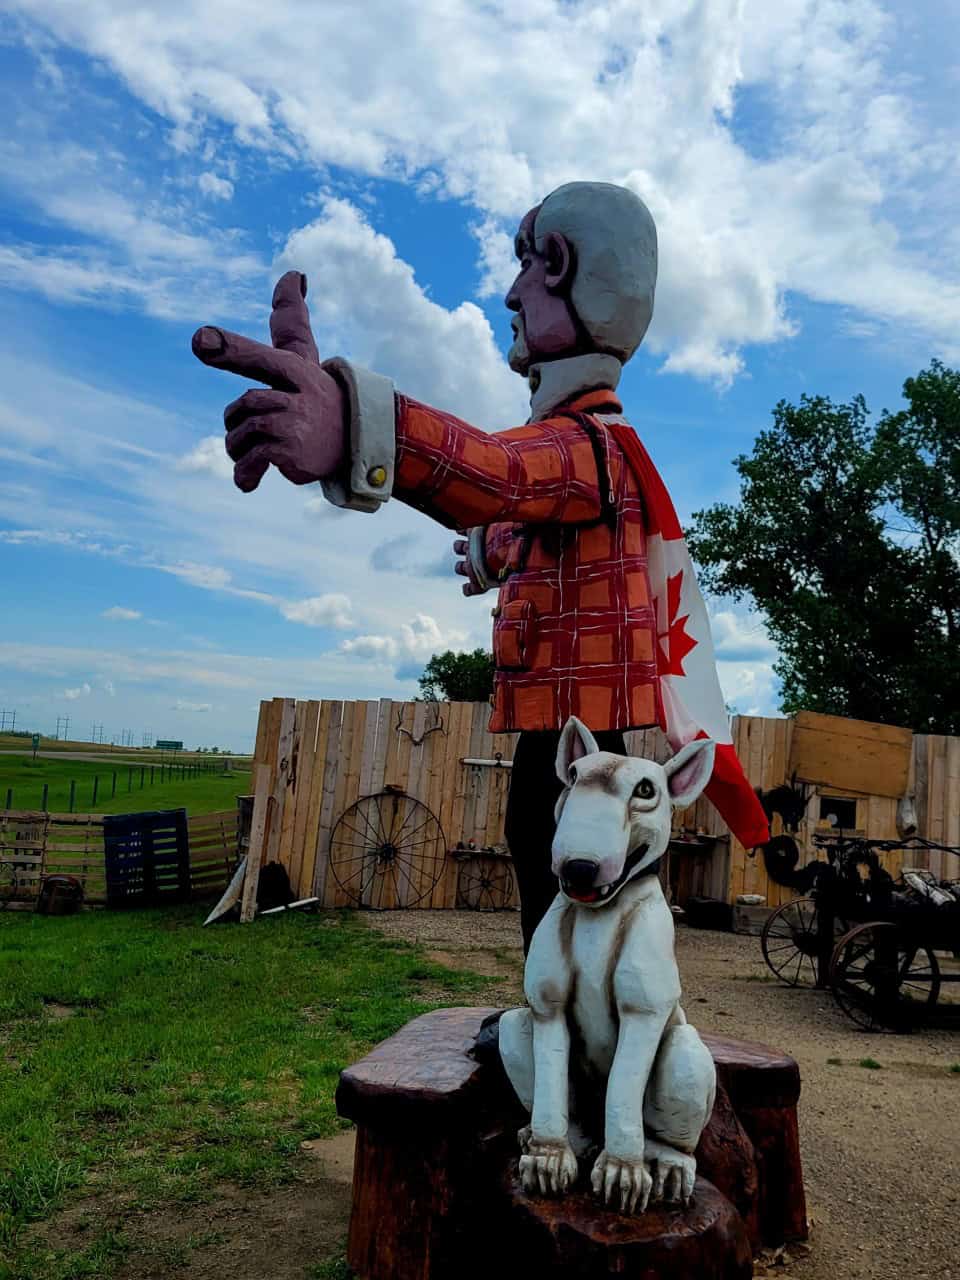 Impressive Carving of Hockey Icon Don Cherry - Mortlach Saskatchewan - This impressive wood carving of Hockey Night in Canada Legend, Don Cherry is made from an old tree and trees from the dump. 
Visit the Village of Mortlach, Saskatchewan and take a selfie with Don & Blue.